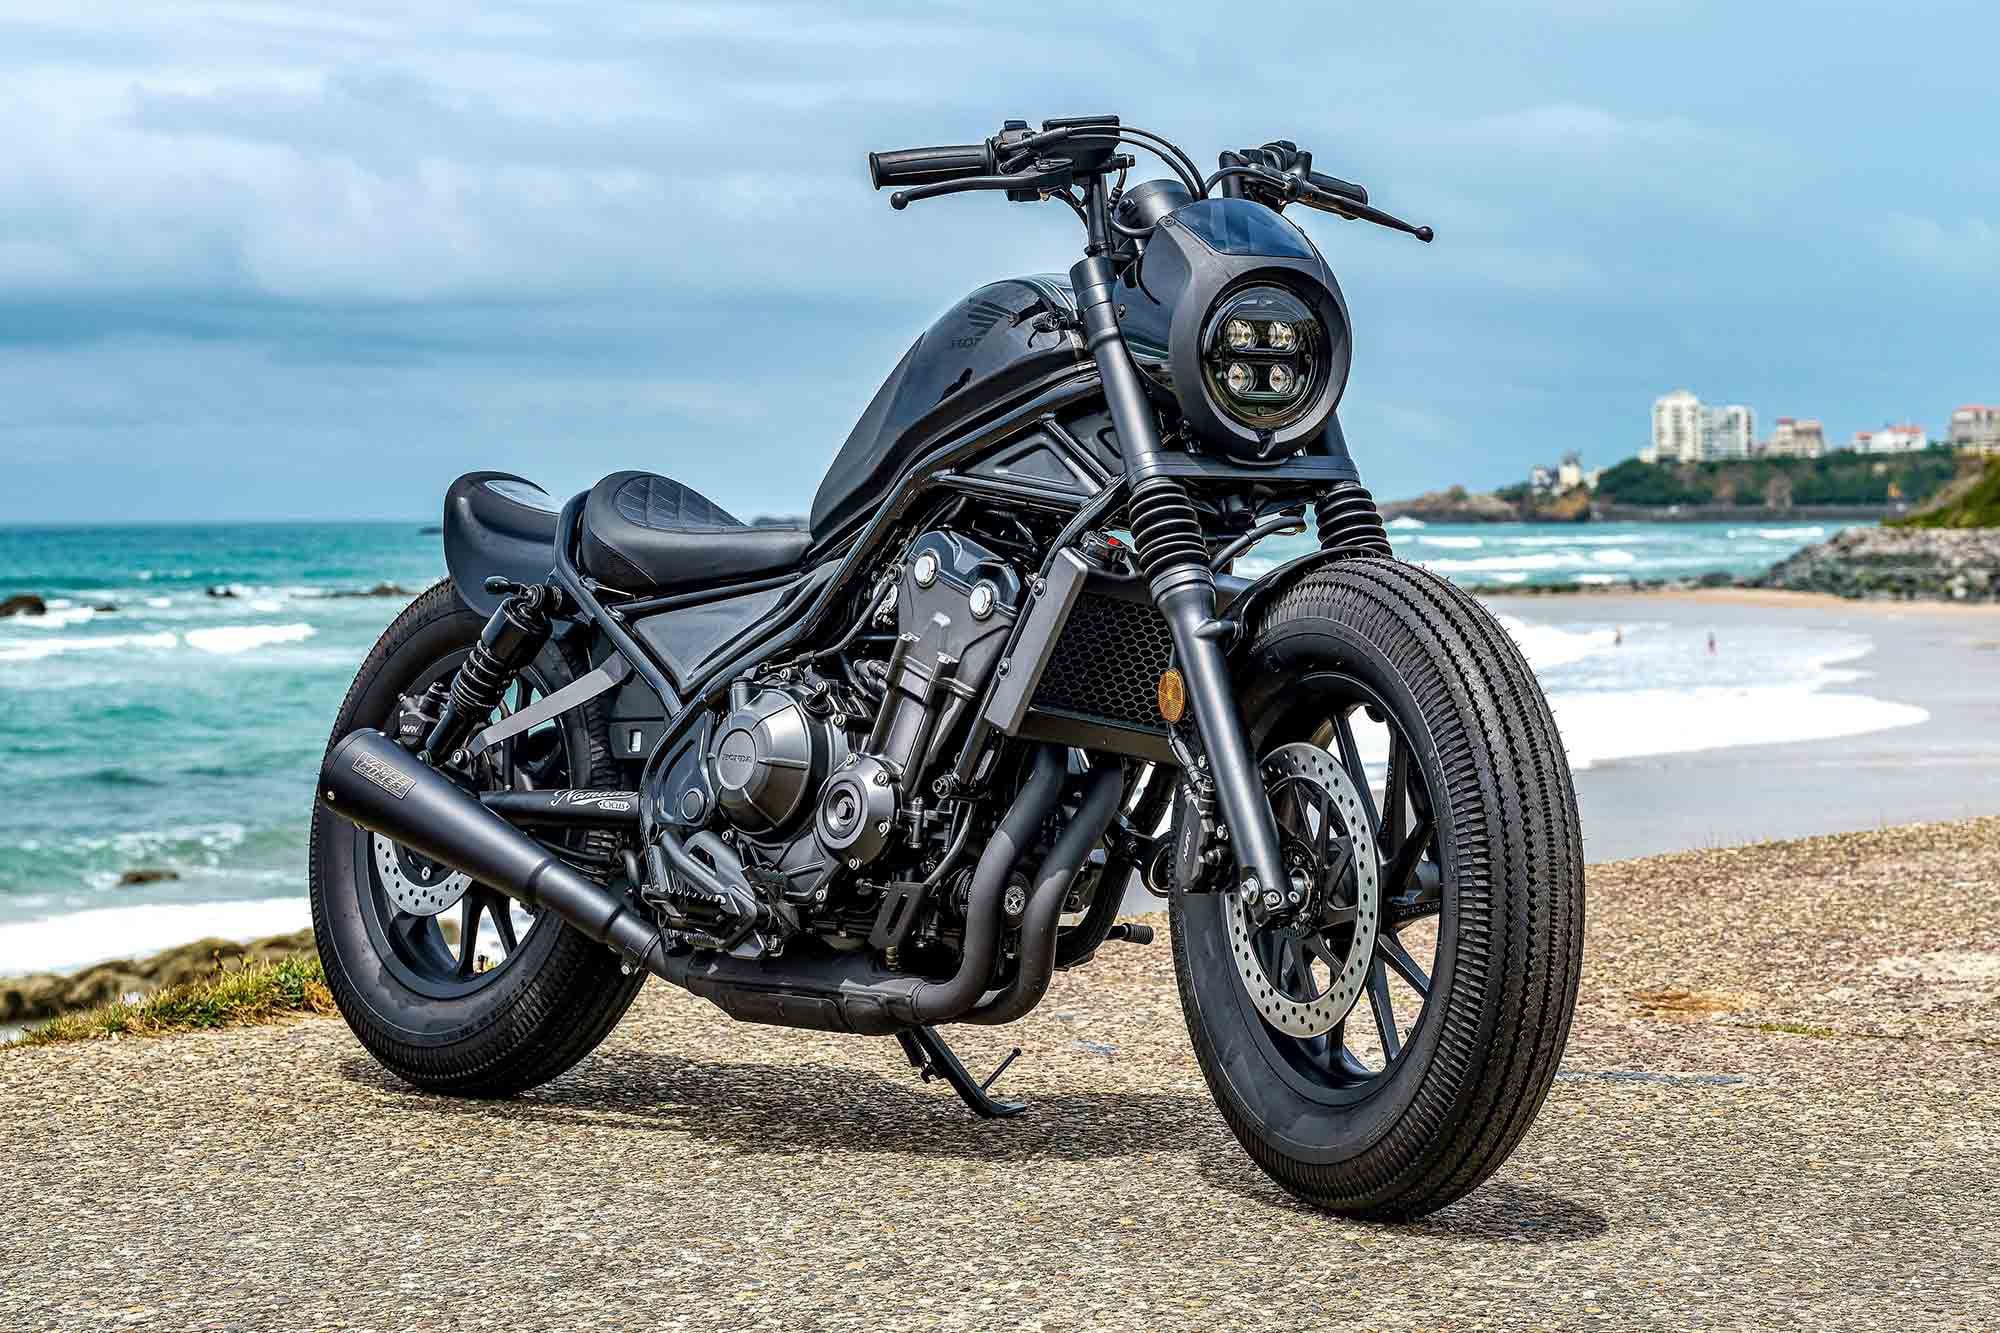 You know there’s gonna be a bagger class, and taking that category here was this slammed, big-wheel Harley Road Glide from Devil’s Garage.